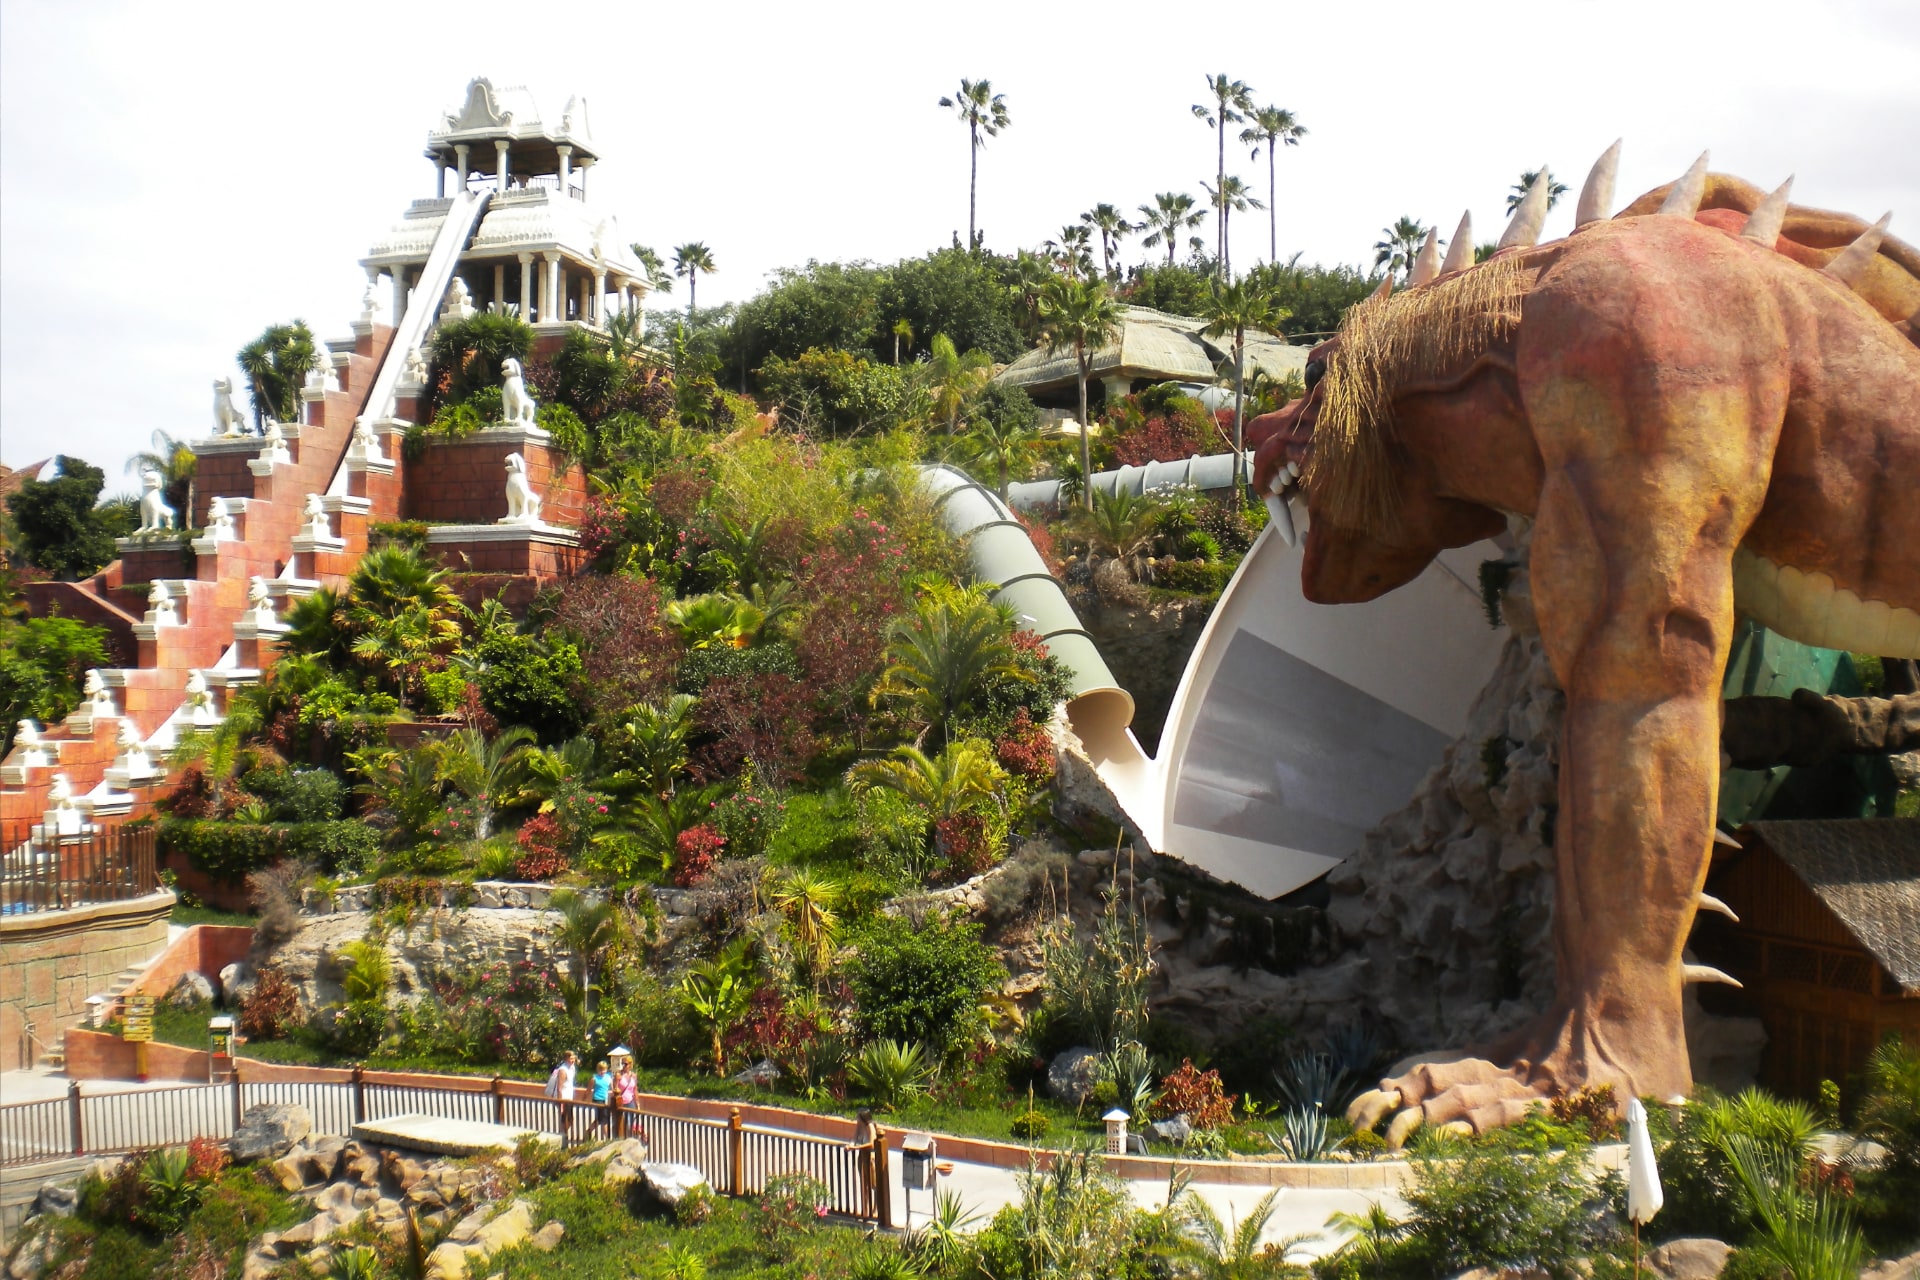 Majestic dragon sculpture at Siam Park, Tenerife, adding a touch of fantasy to the park's ambiance